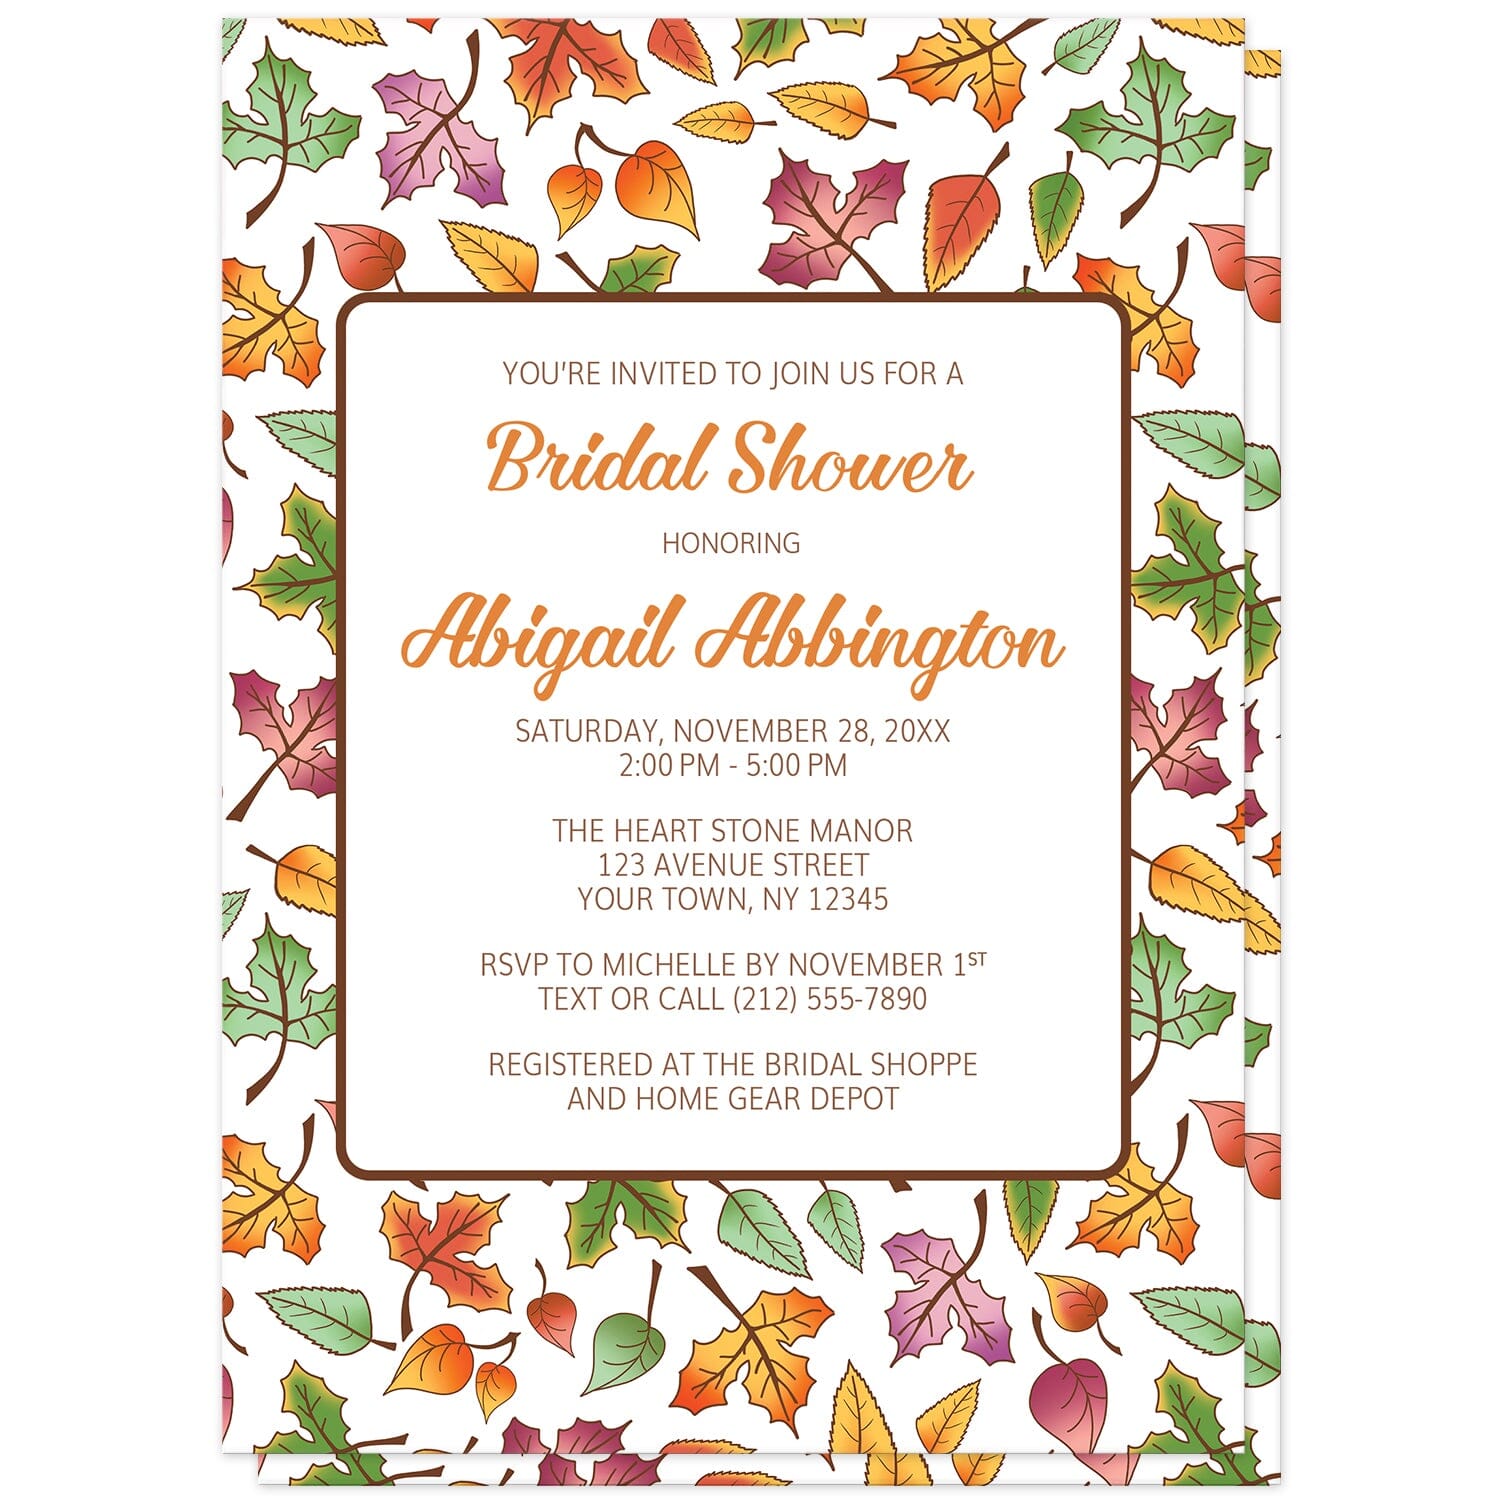 Changing Leaves Fall Bridal Shower Invitations at Artistically Invited. Colorful changing leaves fall bridal shower invitations designed with an autumn leaves pattern in green, orange, purple, and yellow. Your personalized bridal shower celebration details are custom printed in orange and brown on white over the pretty changing leaves fall pattern.